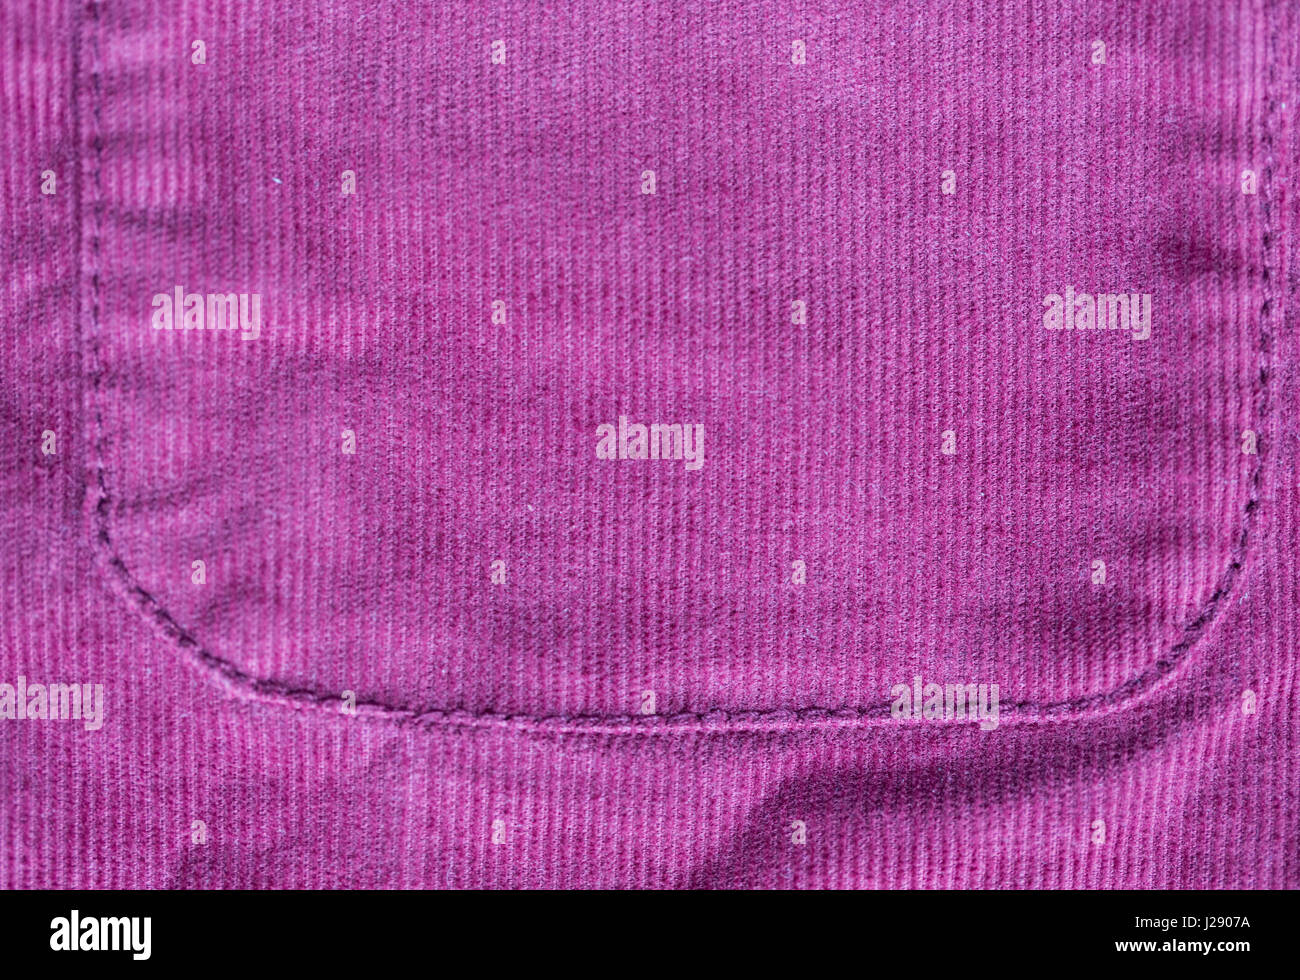 close up of fabric or clothing item with pocket Stock Photo